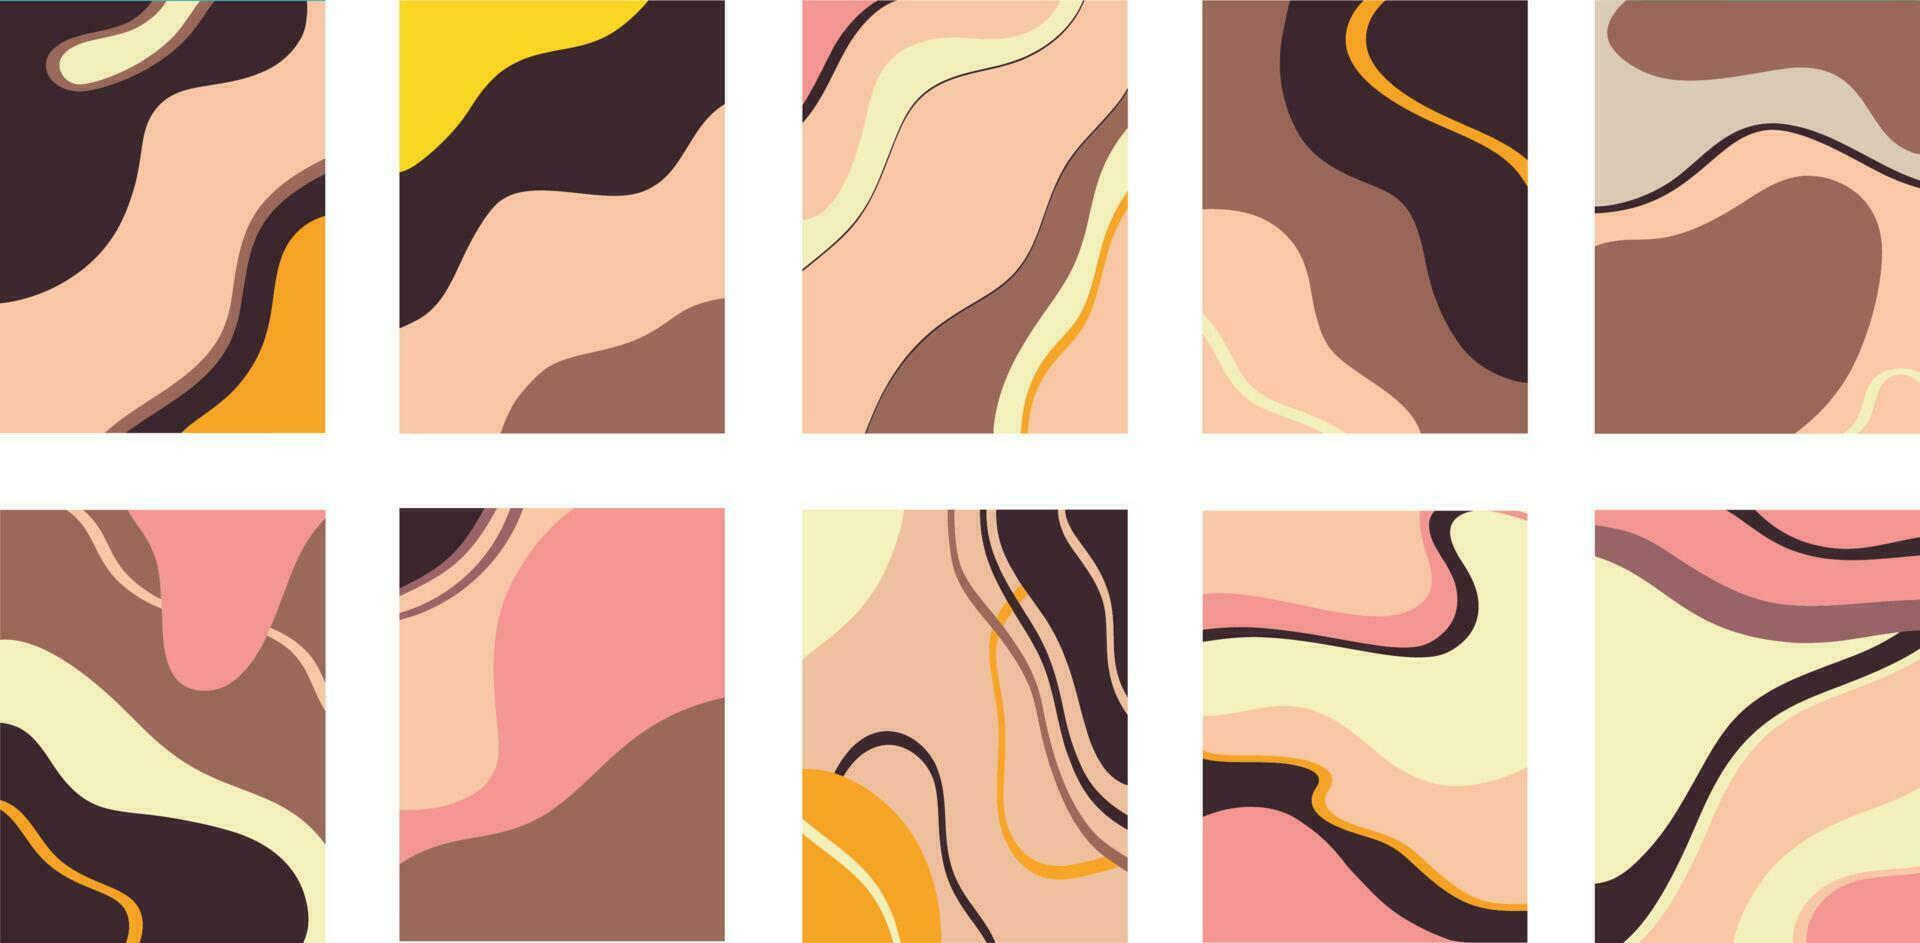 Set of images with colorful chaotic patterns vector